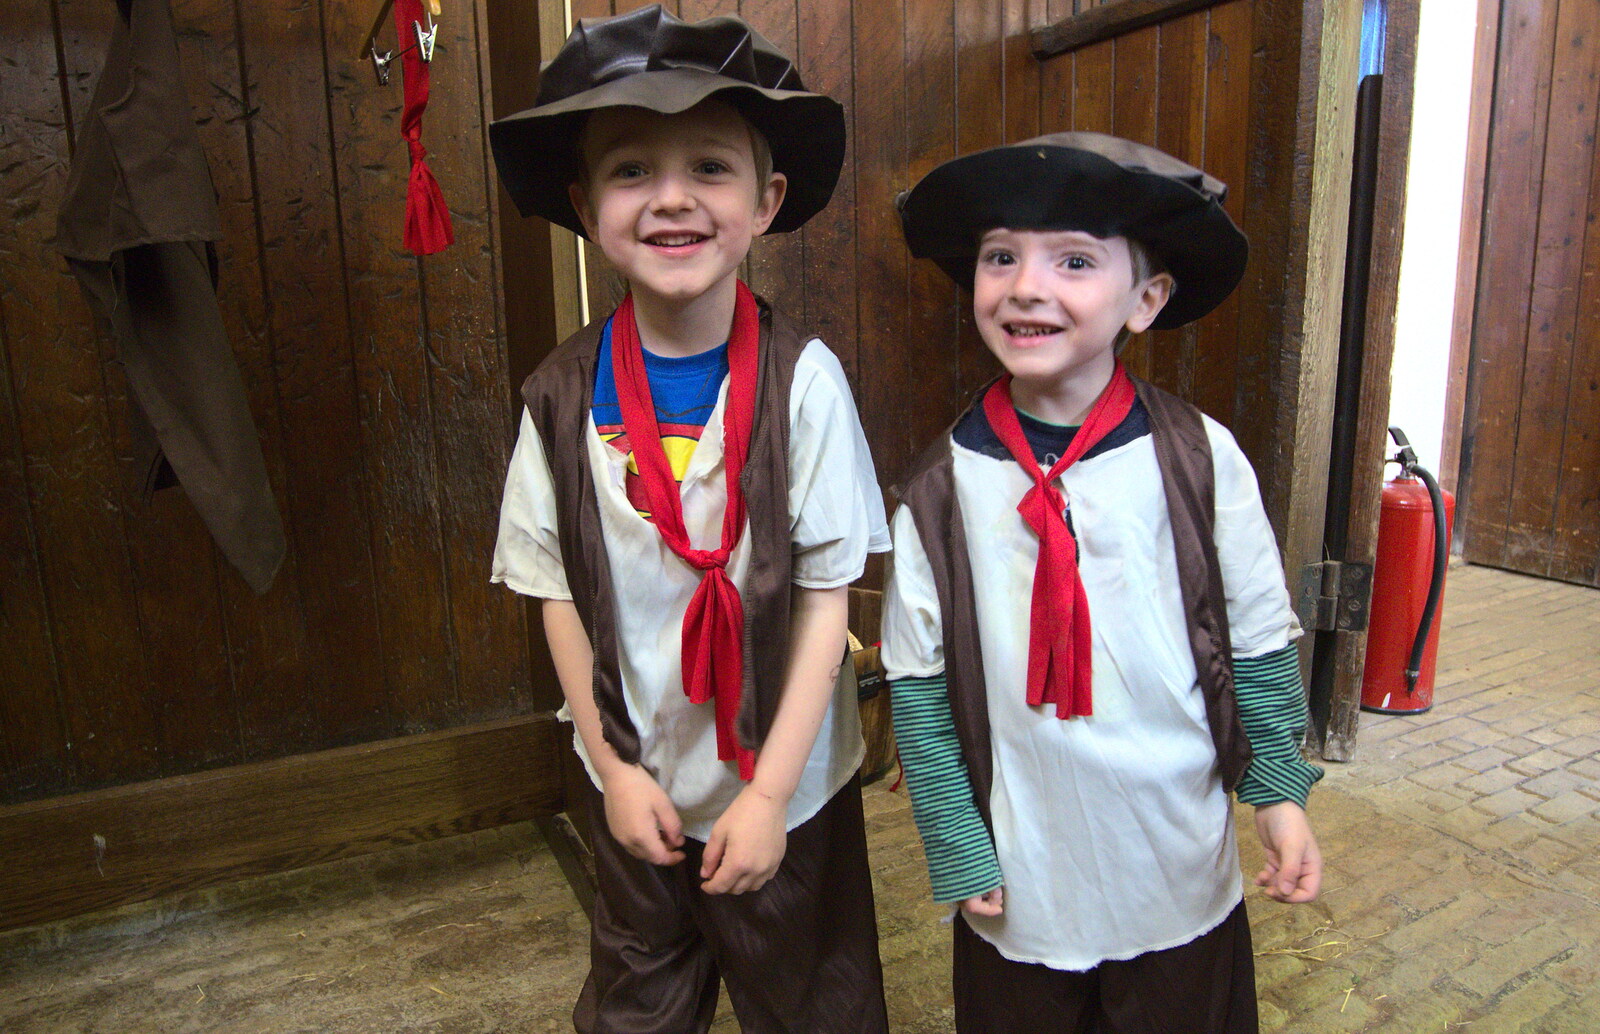 Fred and Kane dress up as 1800s stable boys from A Trip to Audley End House, Saffron Walden, Essex - 16th April 2014